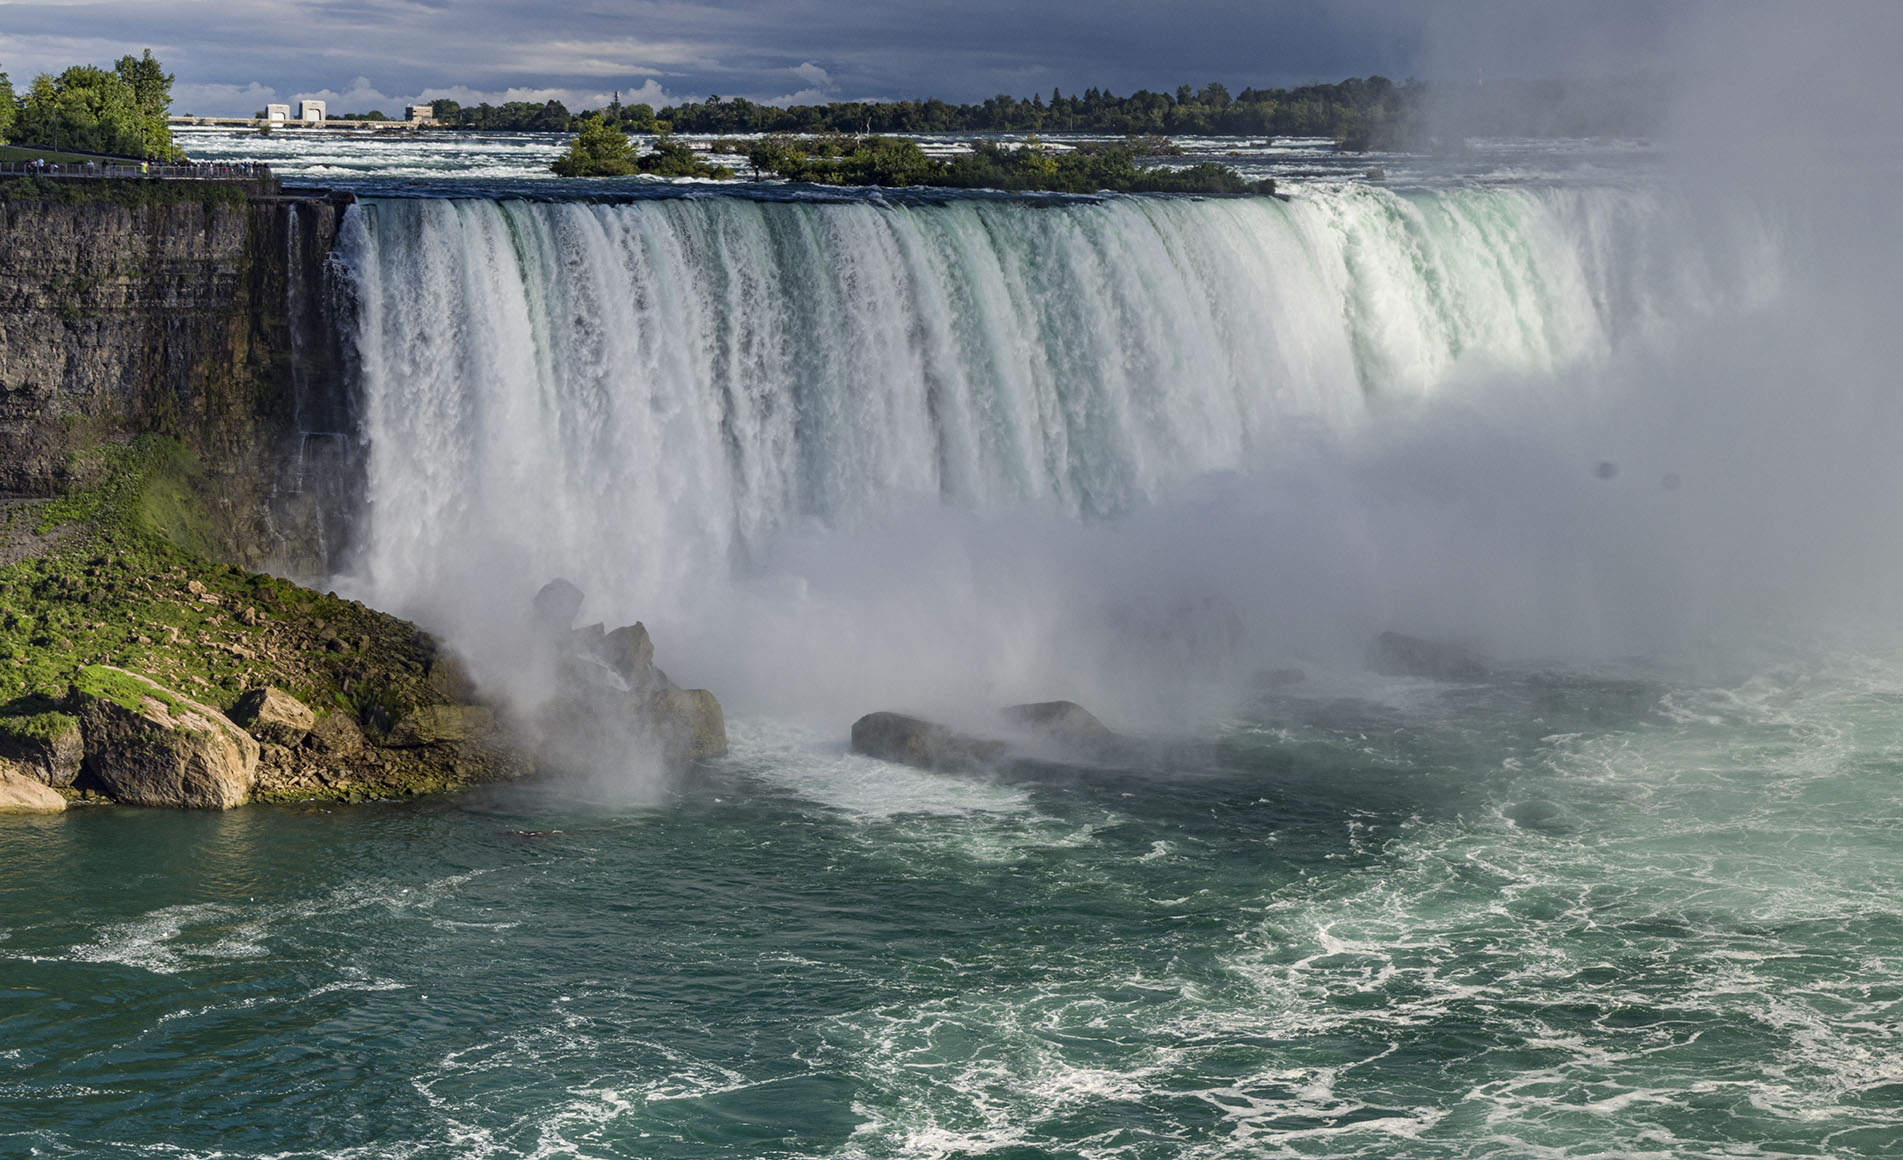 The American Falls from the Parkway